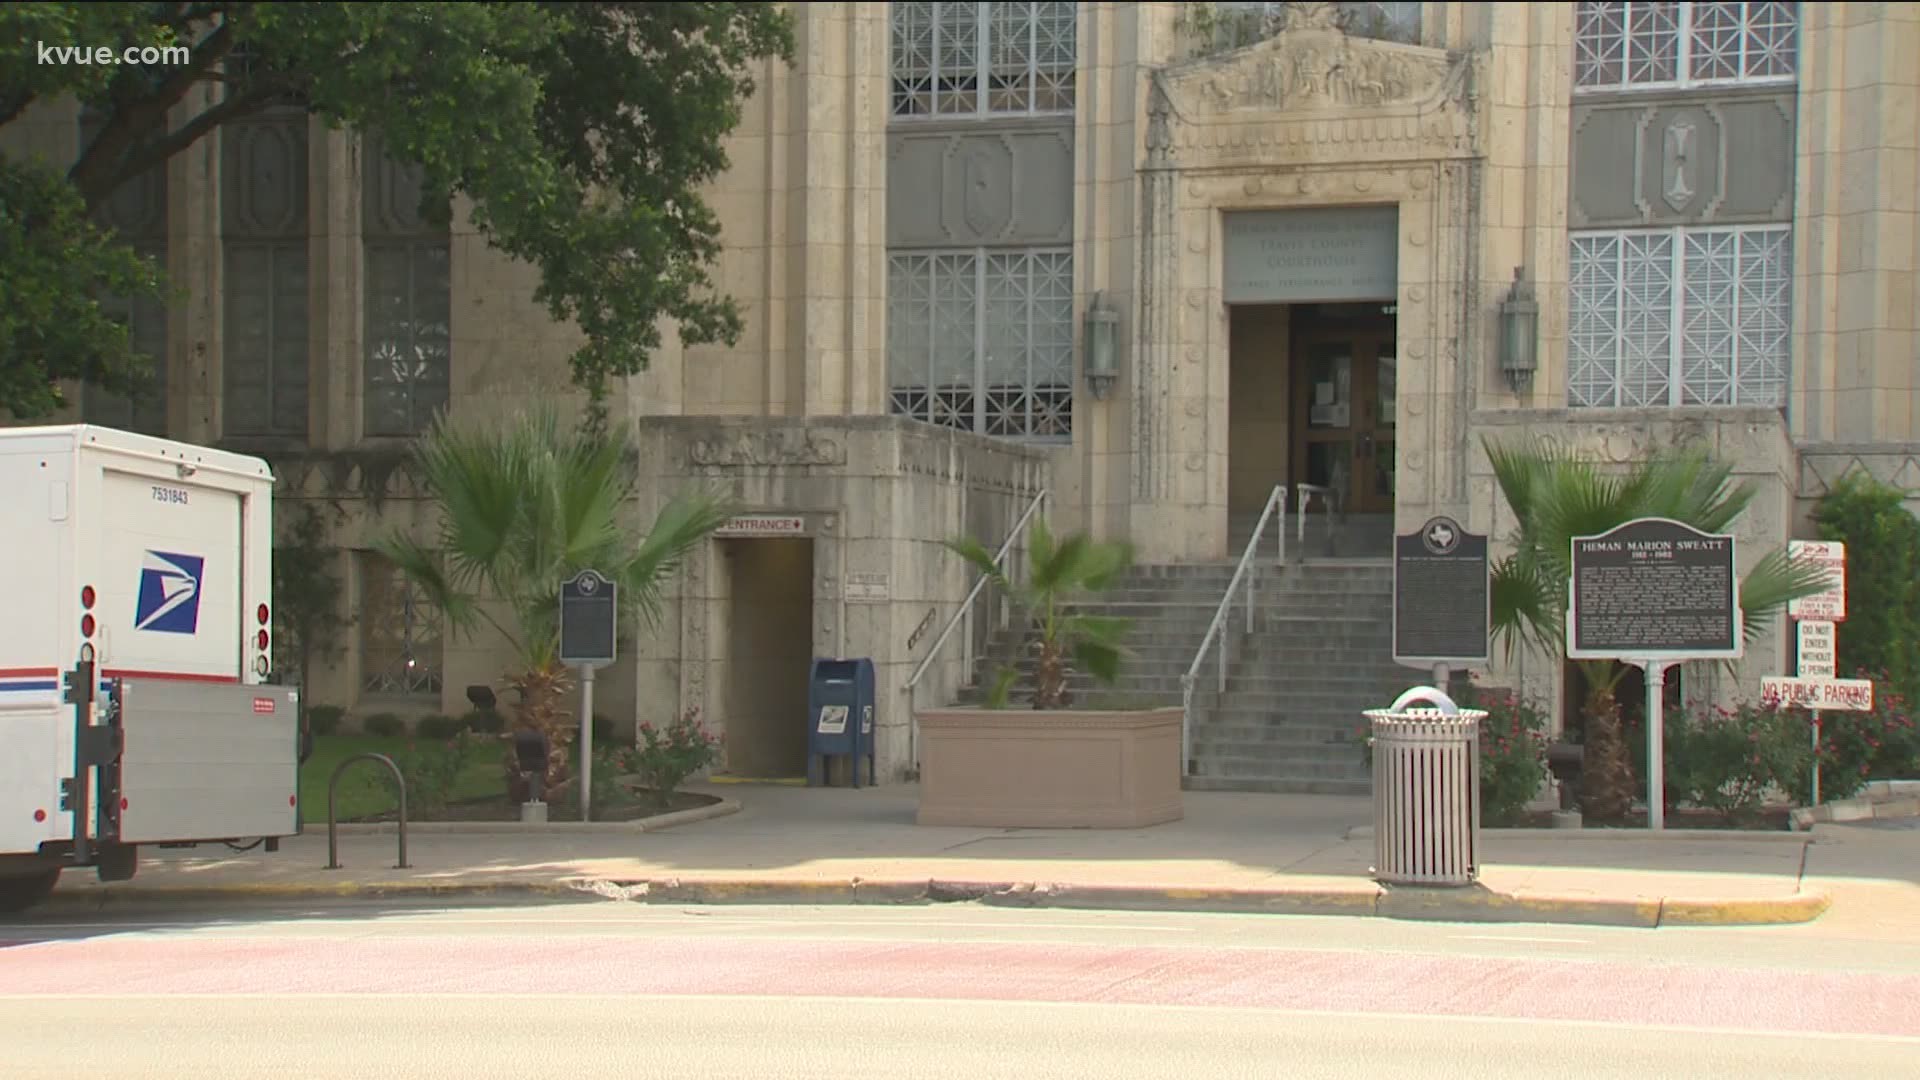 Despite rising case numbers, the Travis County Clerk's Office has dozens of employees back working in the office.